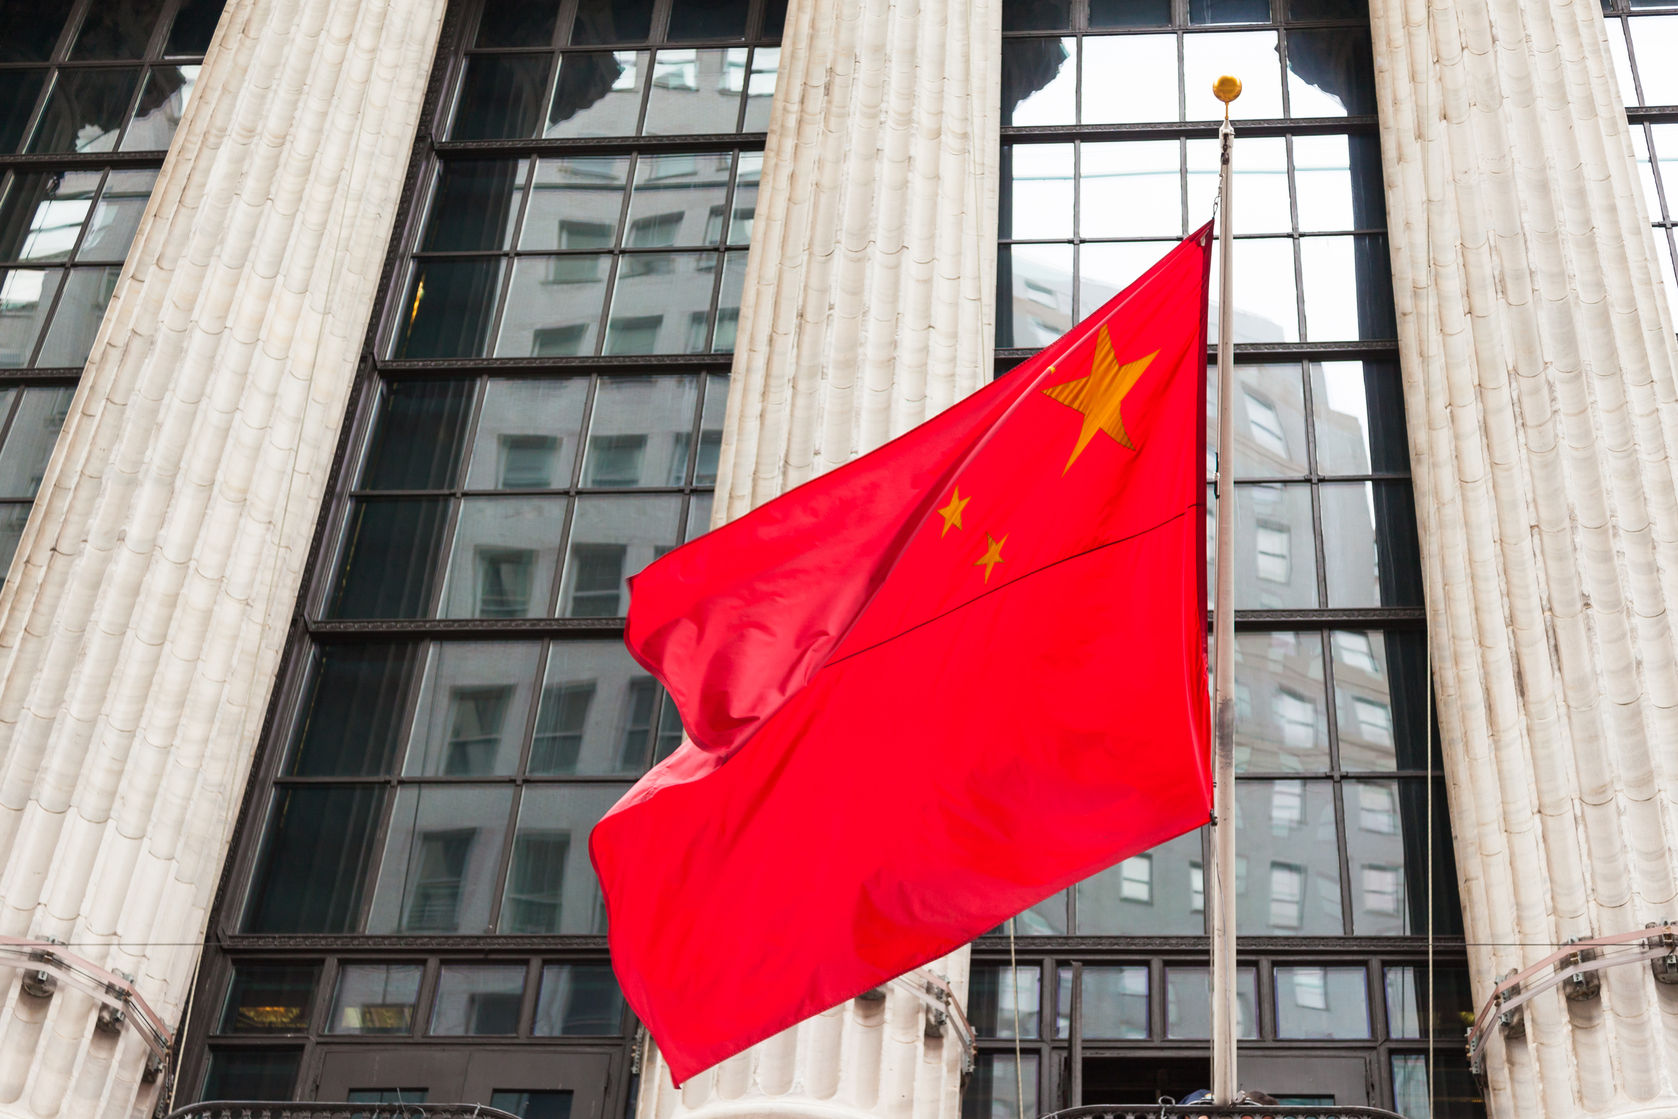 New Blocking Rules Adopted In China May Force Companies To Choose Between US Or China Law.